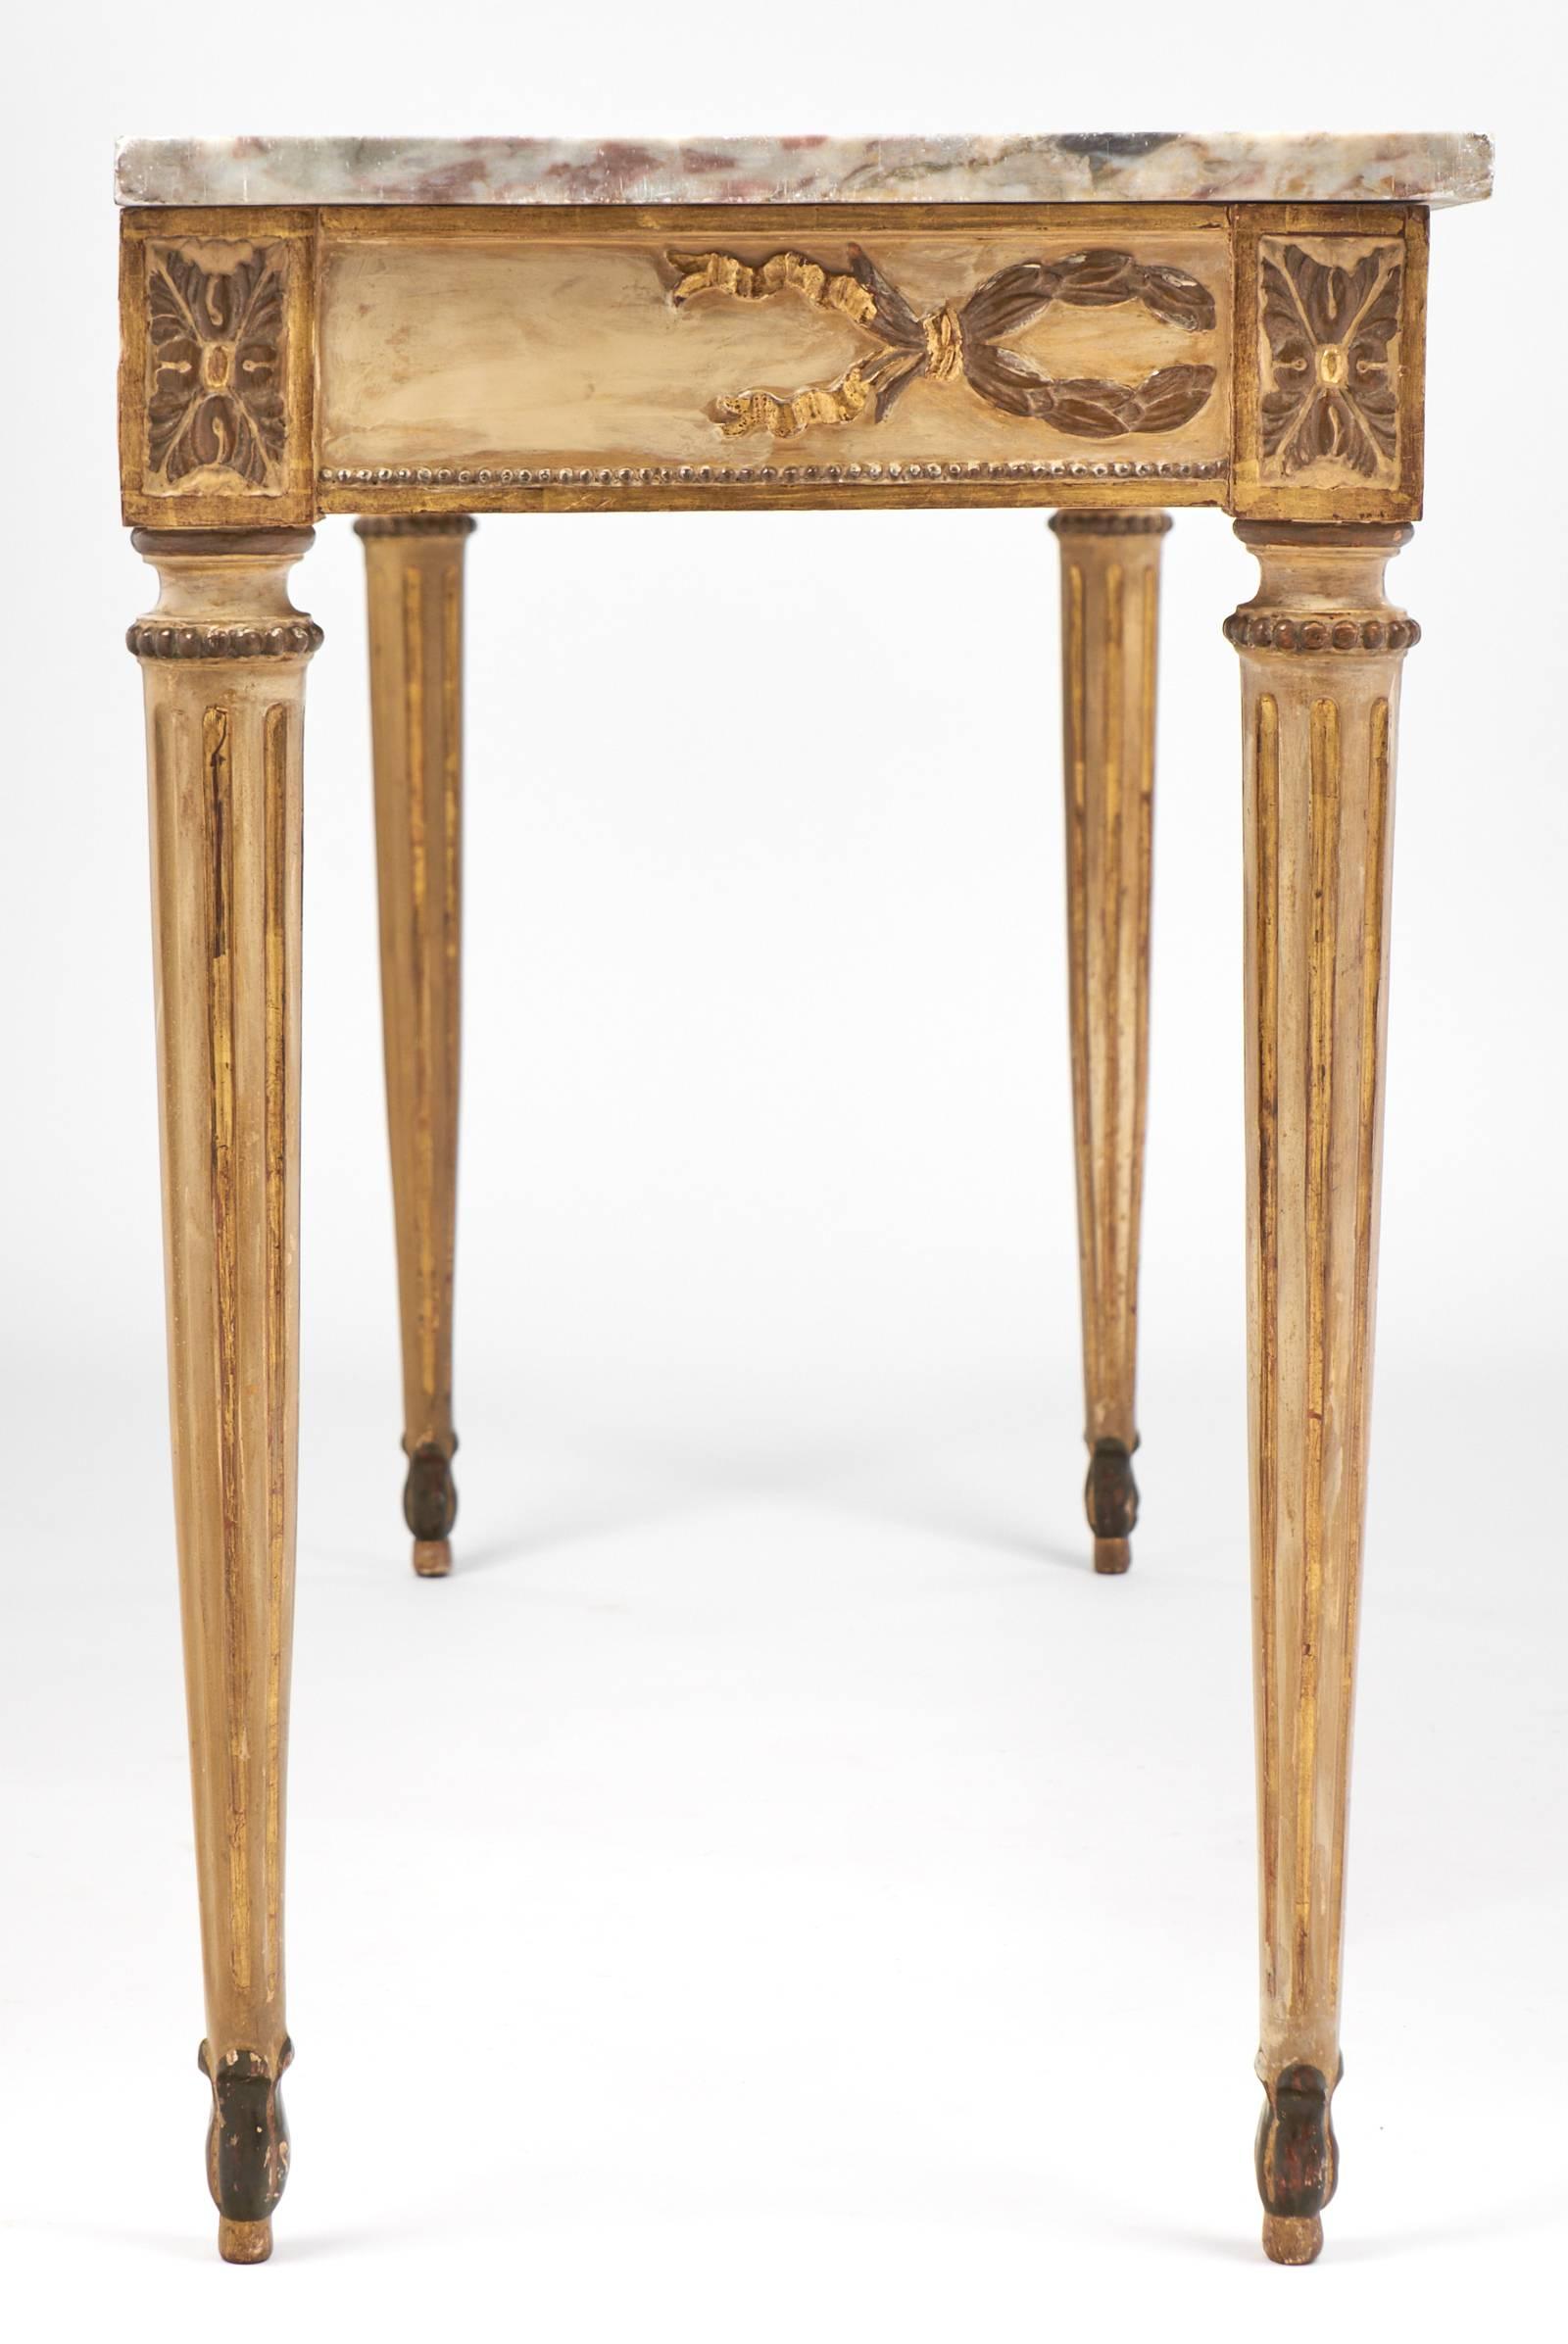 19th Century Antique Pair of Italian Marble-Top Console Tables